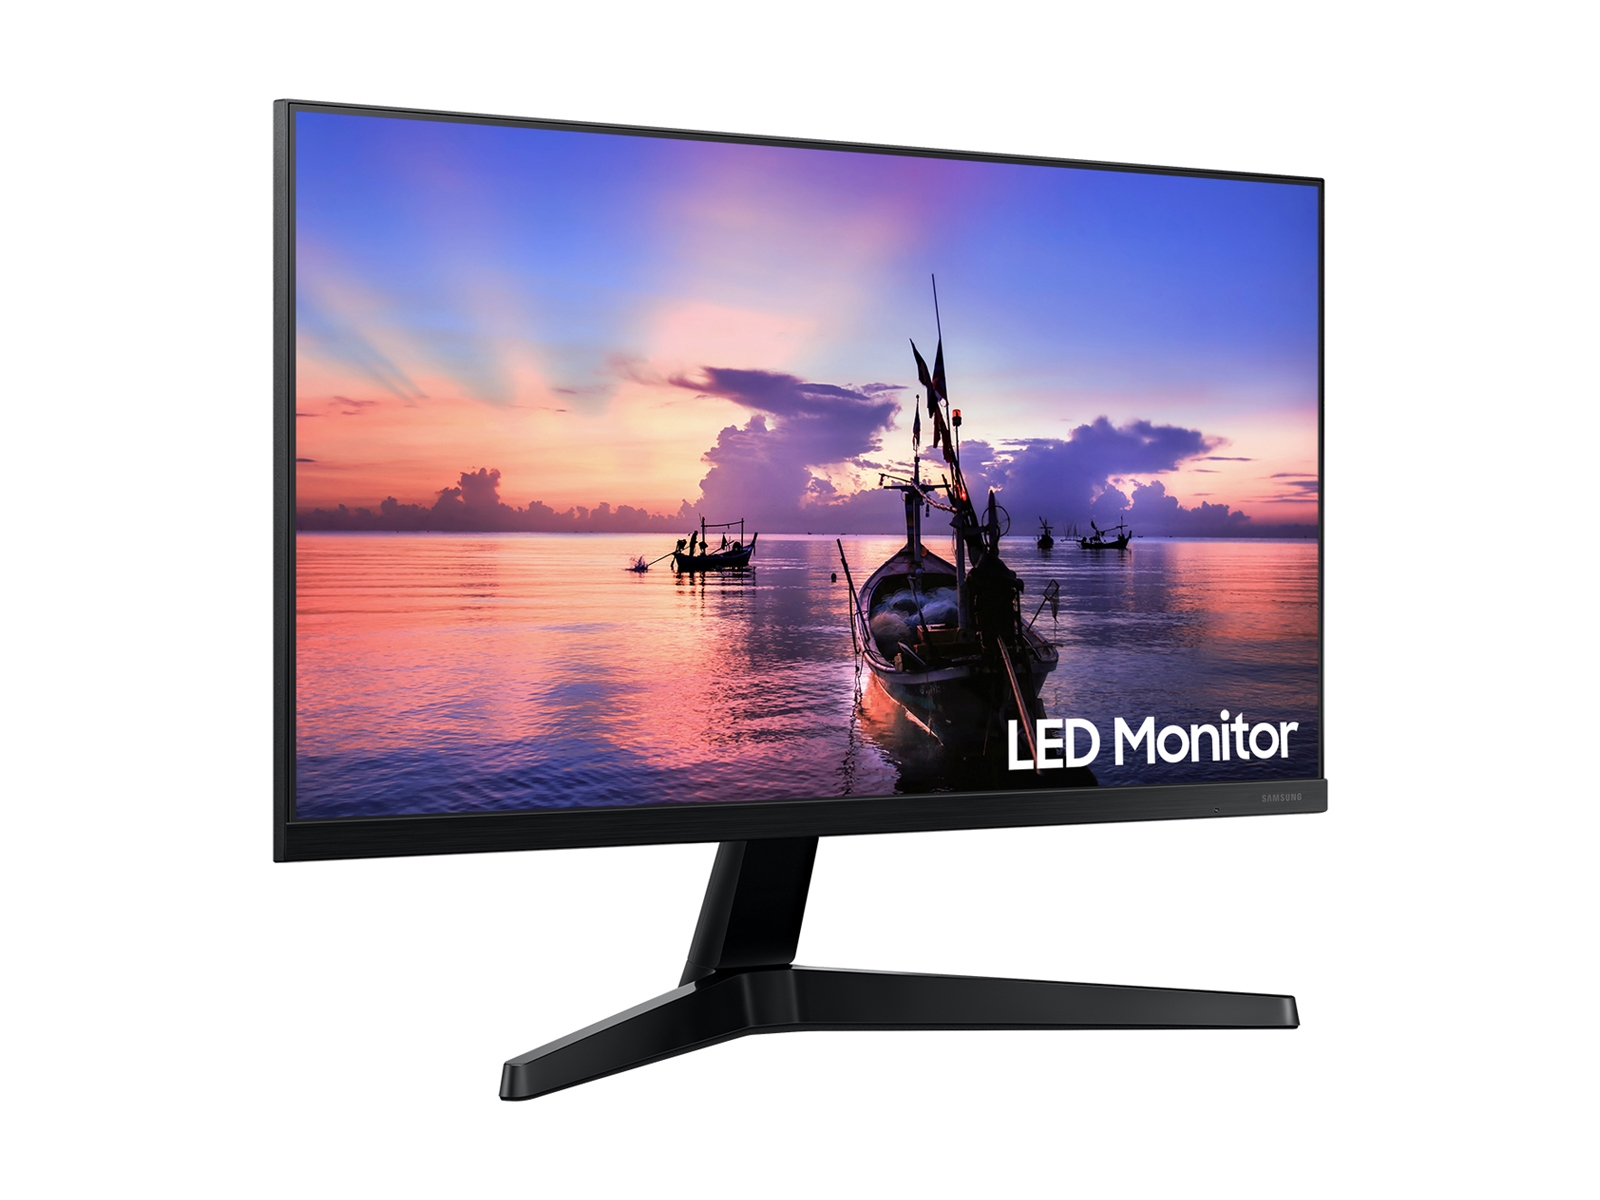 Buy Ips Led Monitors Online at Best Price in India